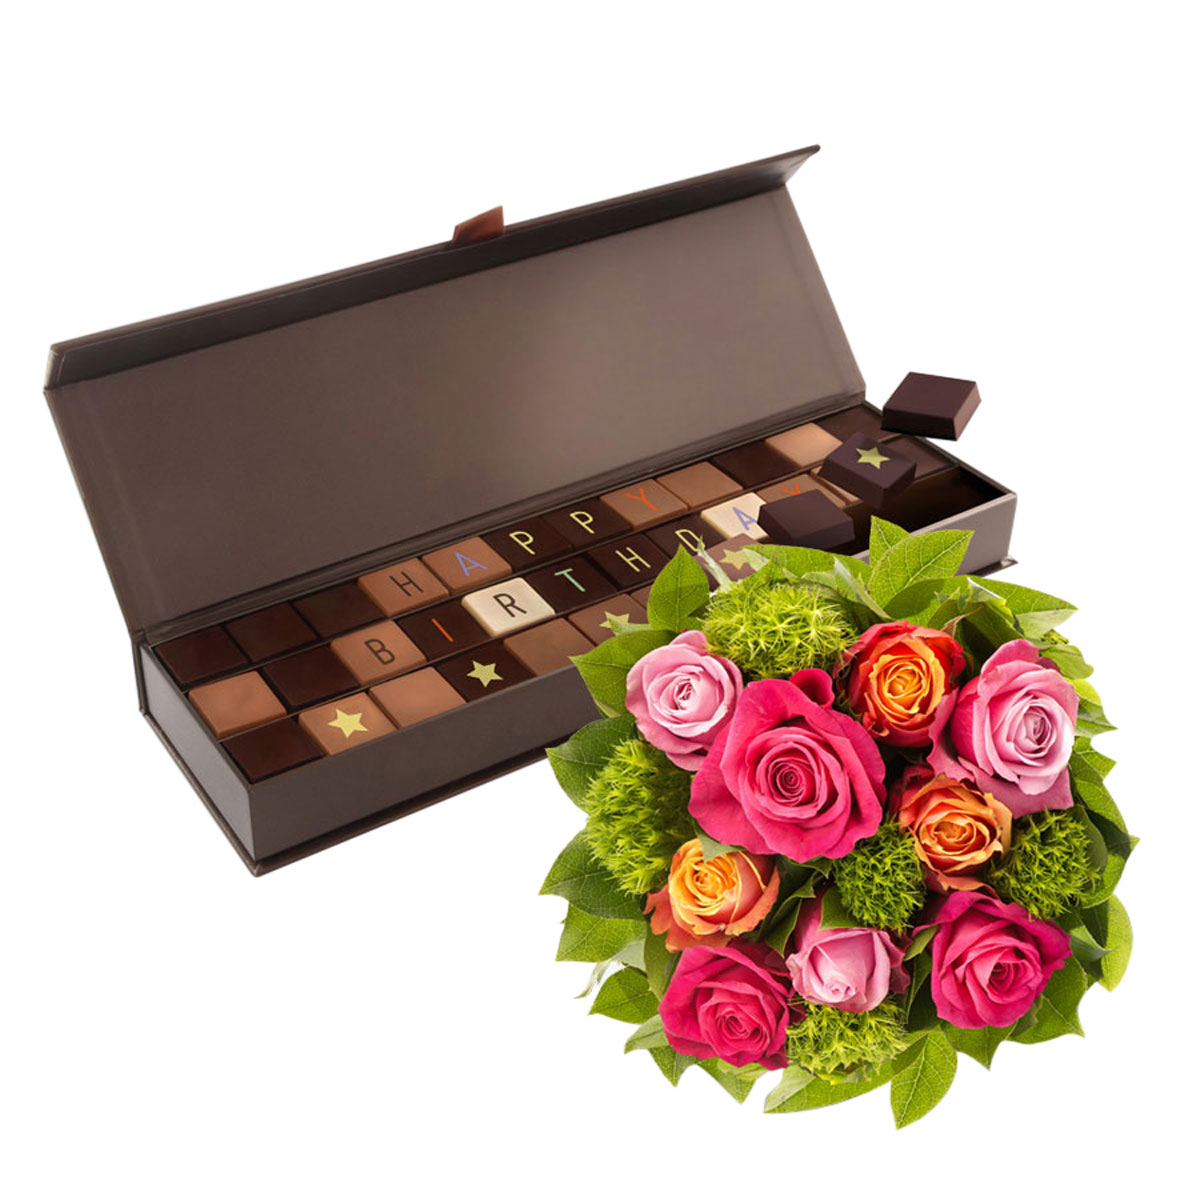 http://www.giftsforeurope.com/images/gene/prod/zoom/cado001192_01_chocol-happy-birthday-roses-bouquet.jpg